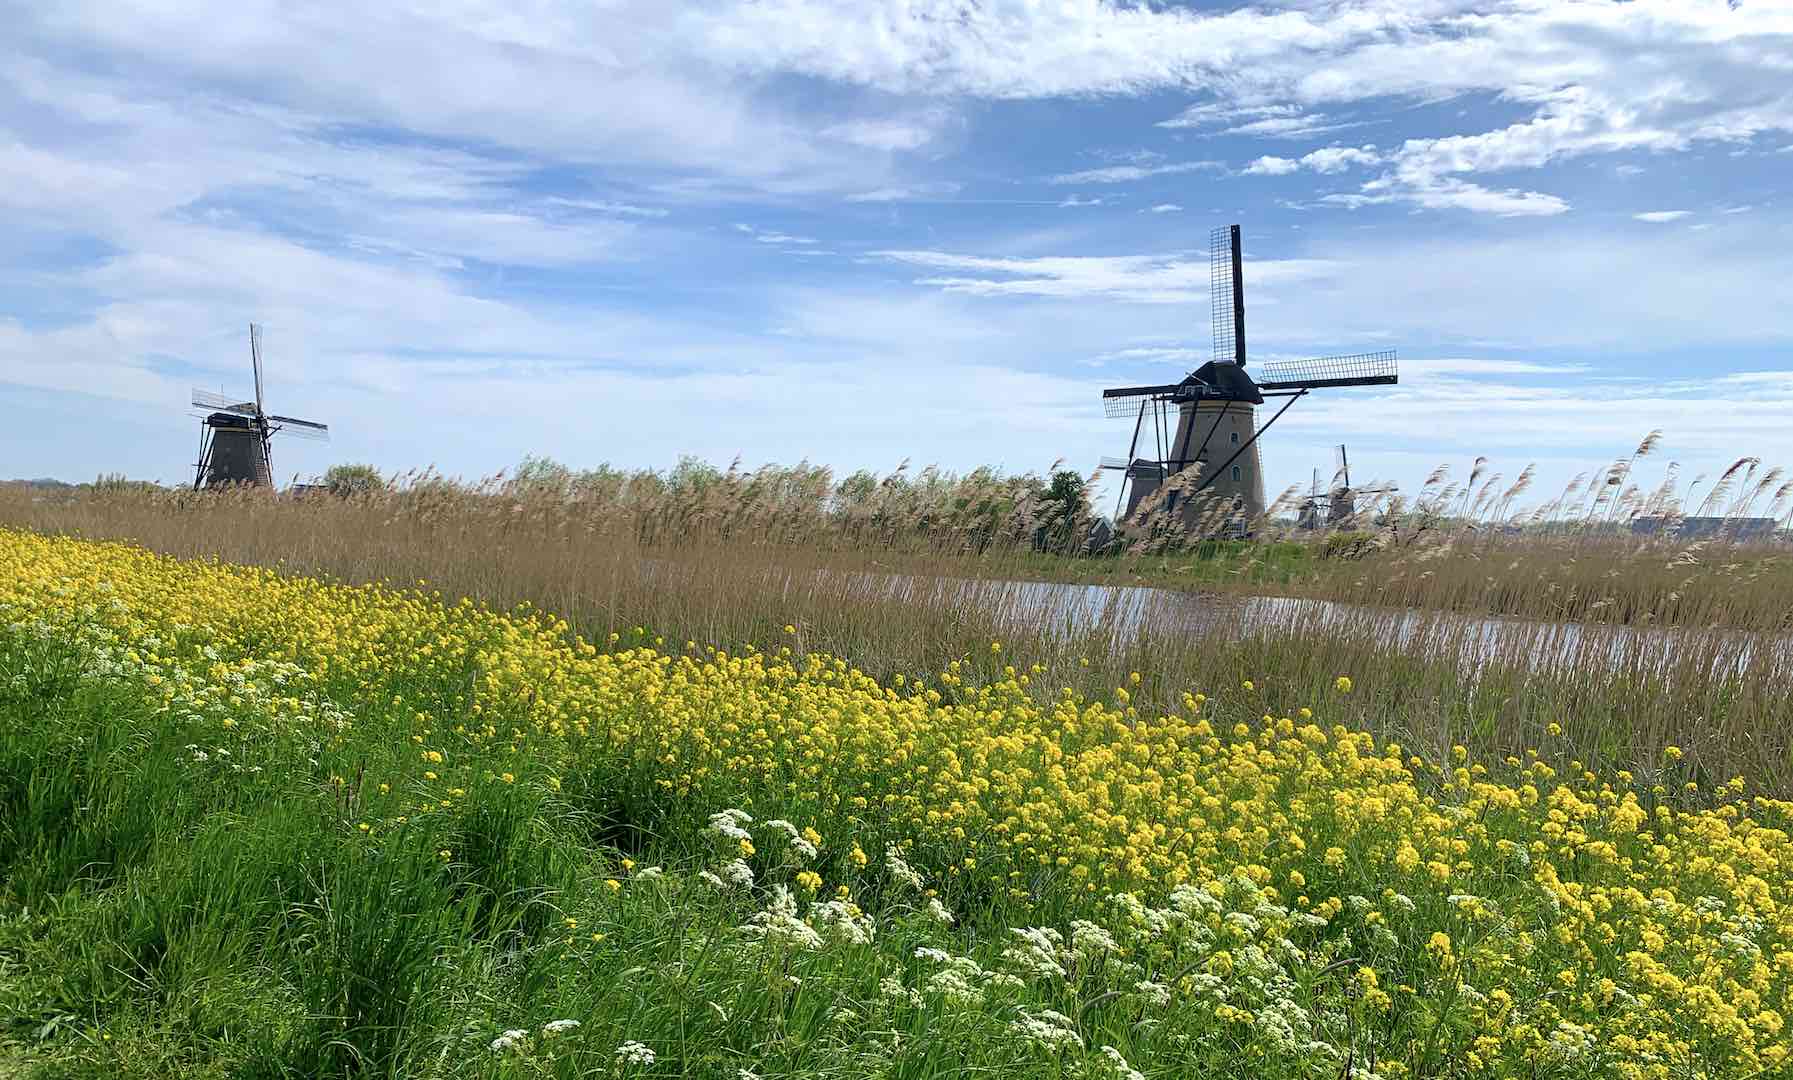 Kinderdijk's beautiful windmills along the canal with flowers in bloom.